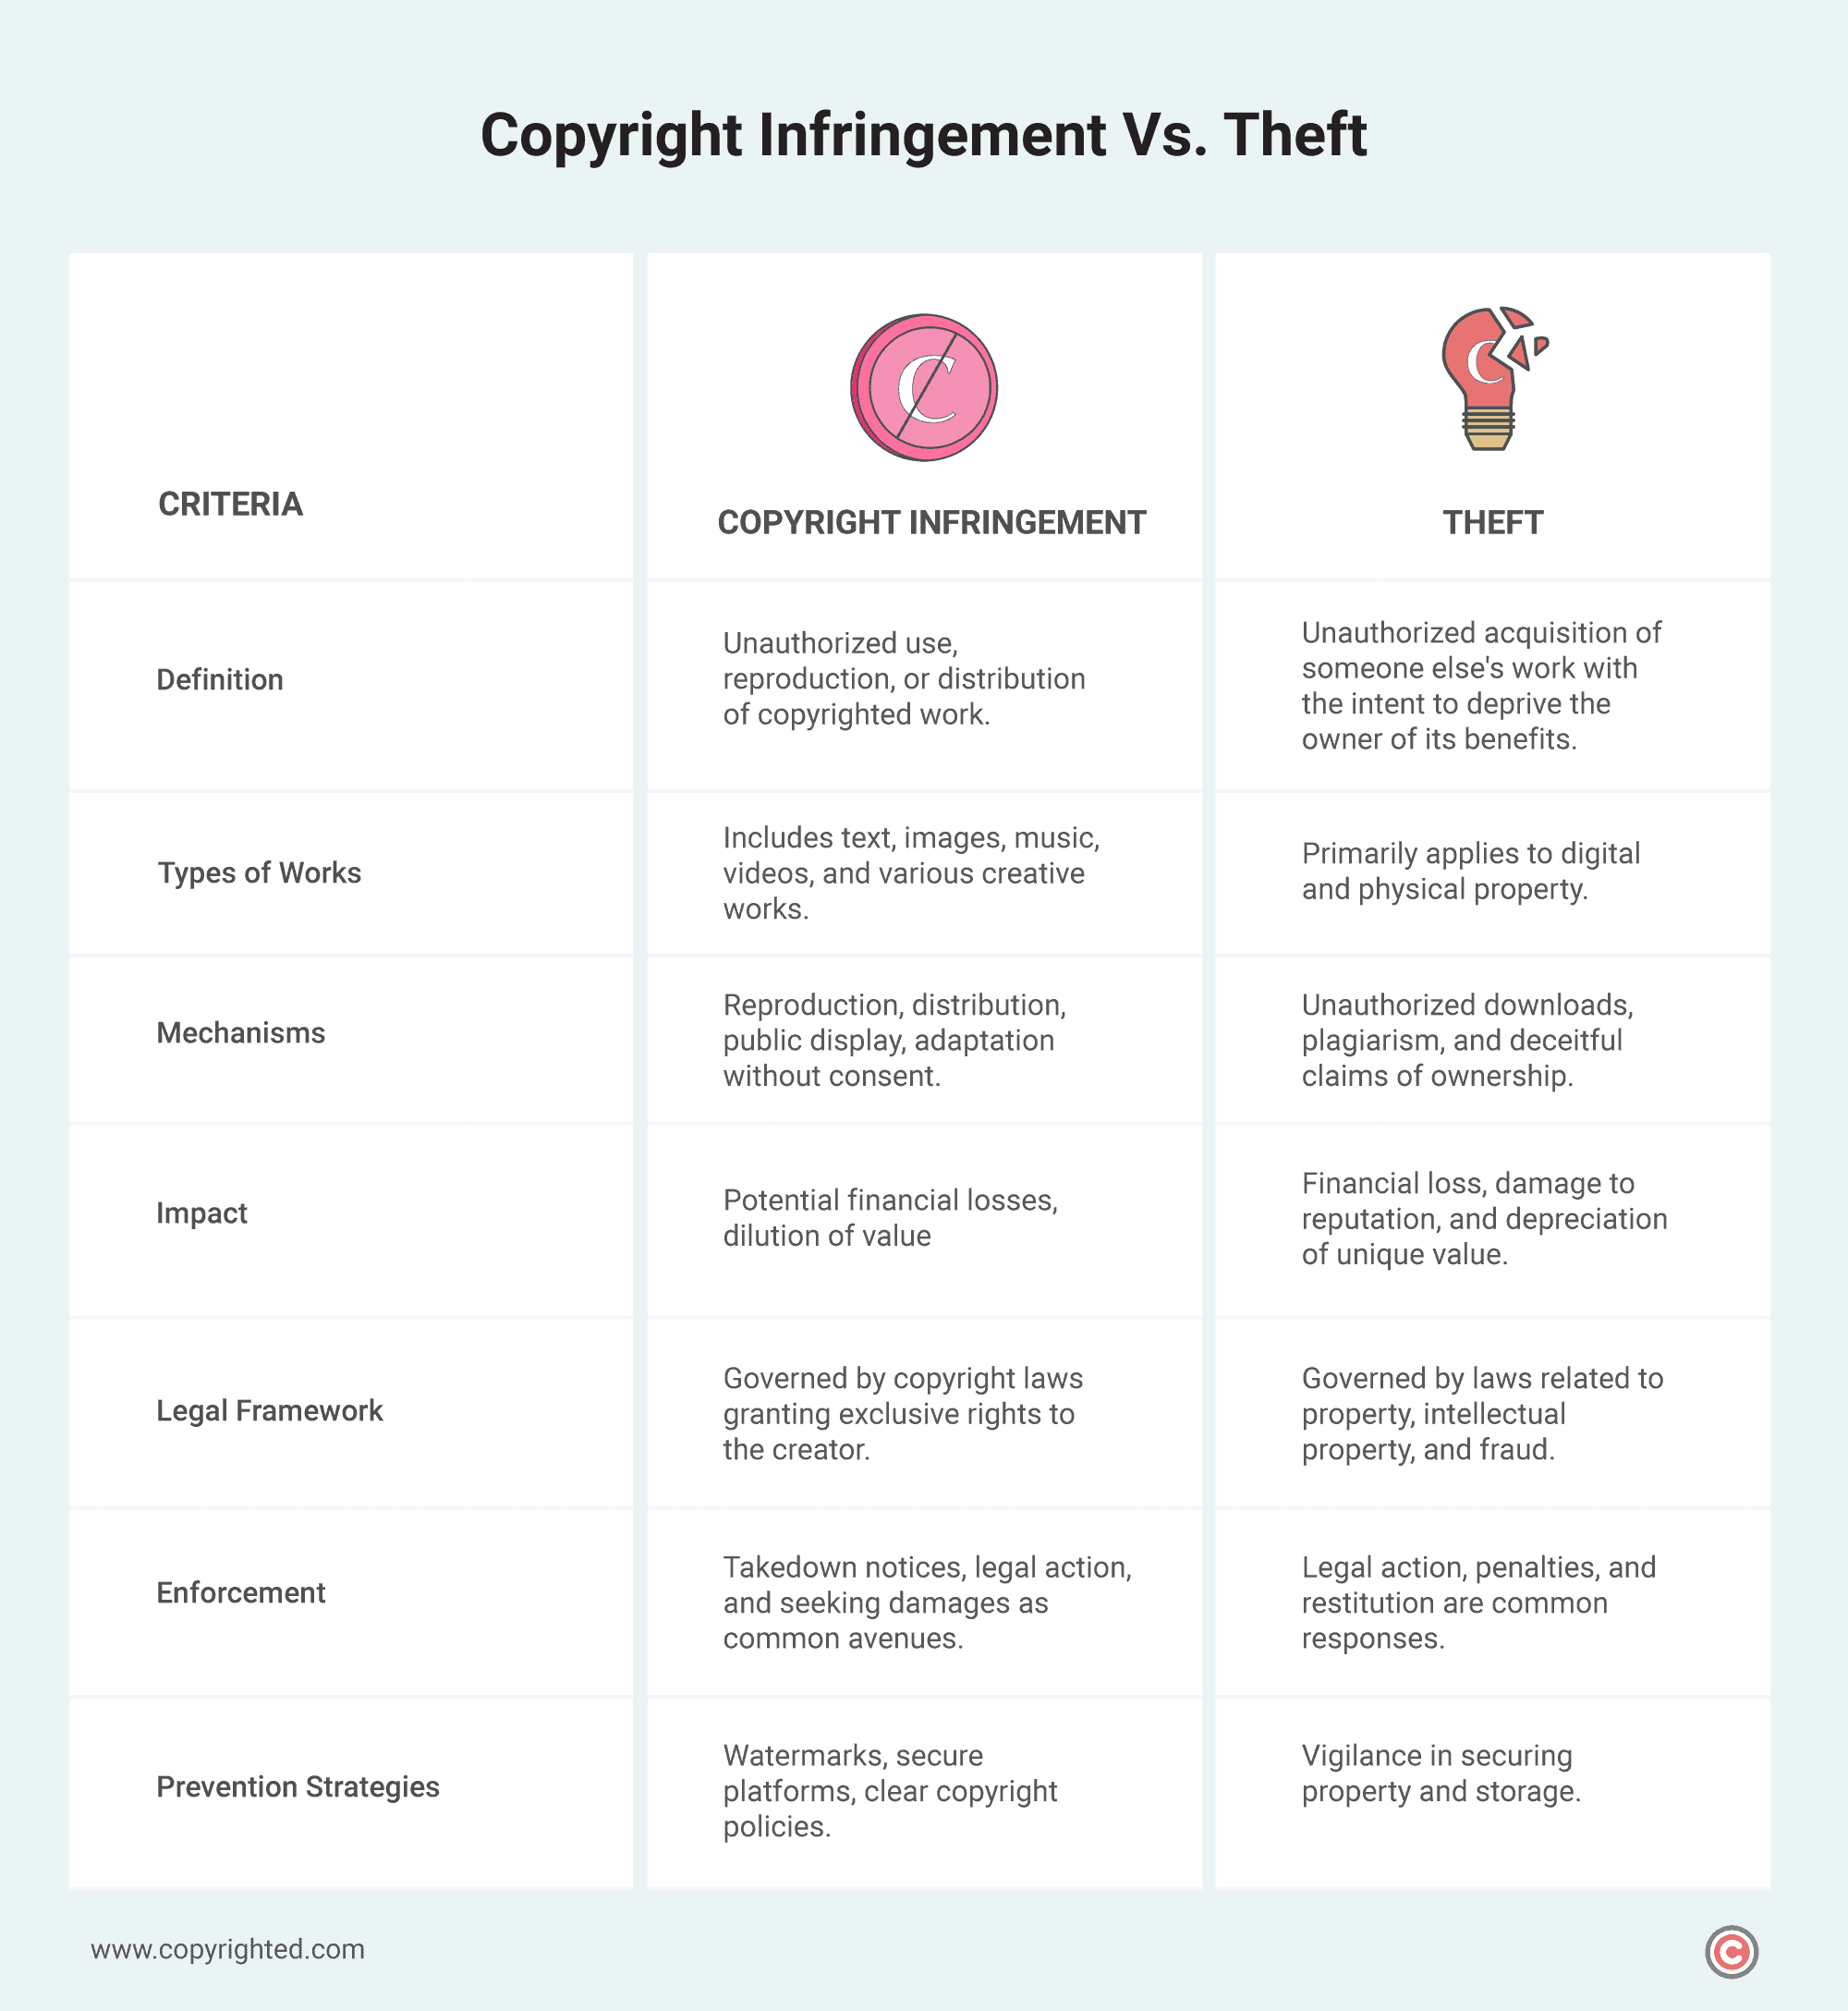 A comparison table simplifying the differences between copyright infringement and theft across seven criteria.